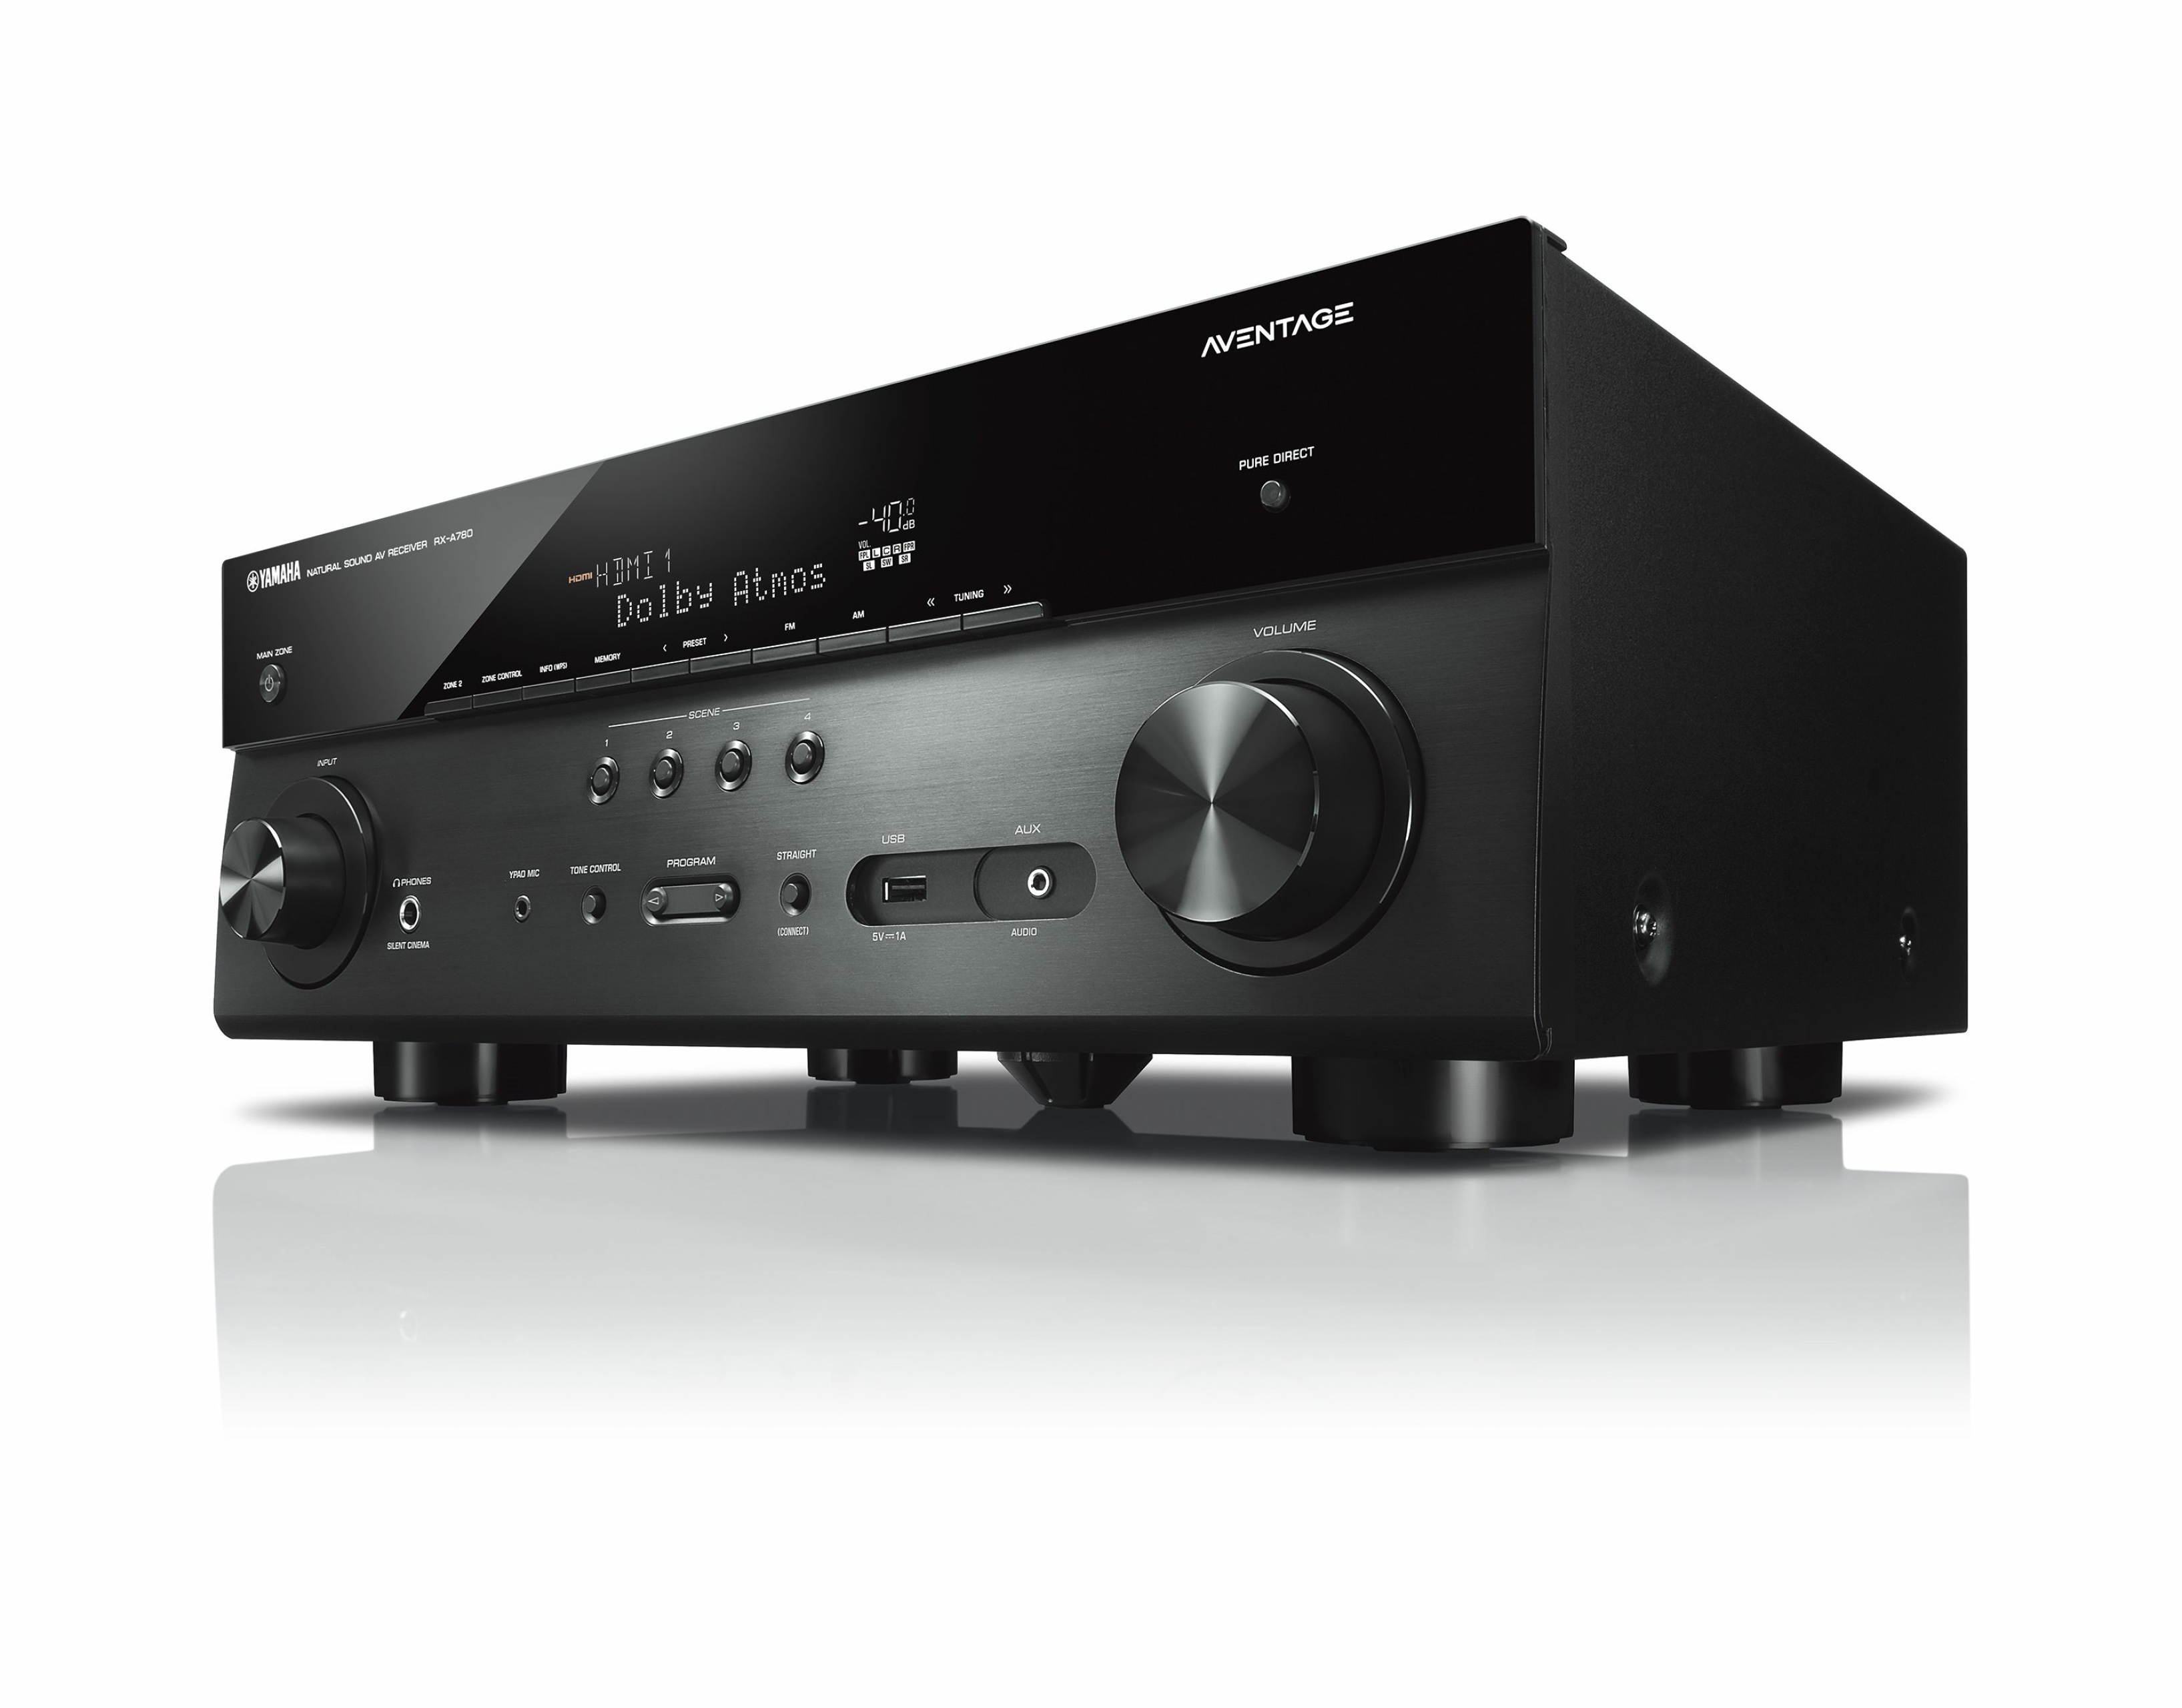 Yamaha RX-A780 7.1 Home Theatre Receiver - Aventage Series ...